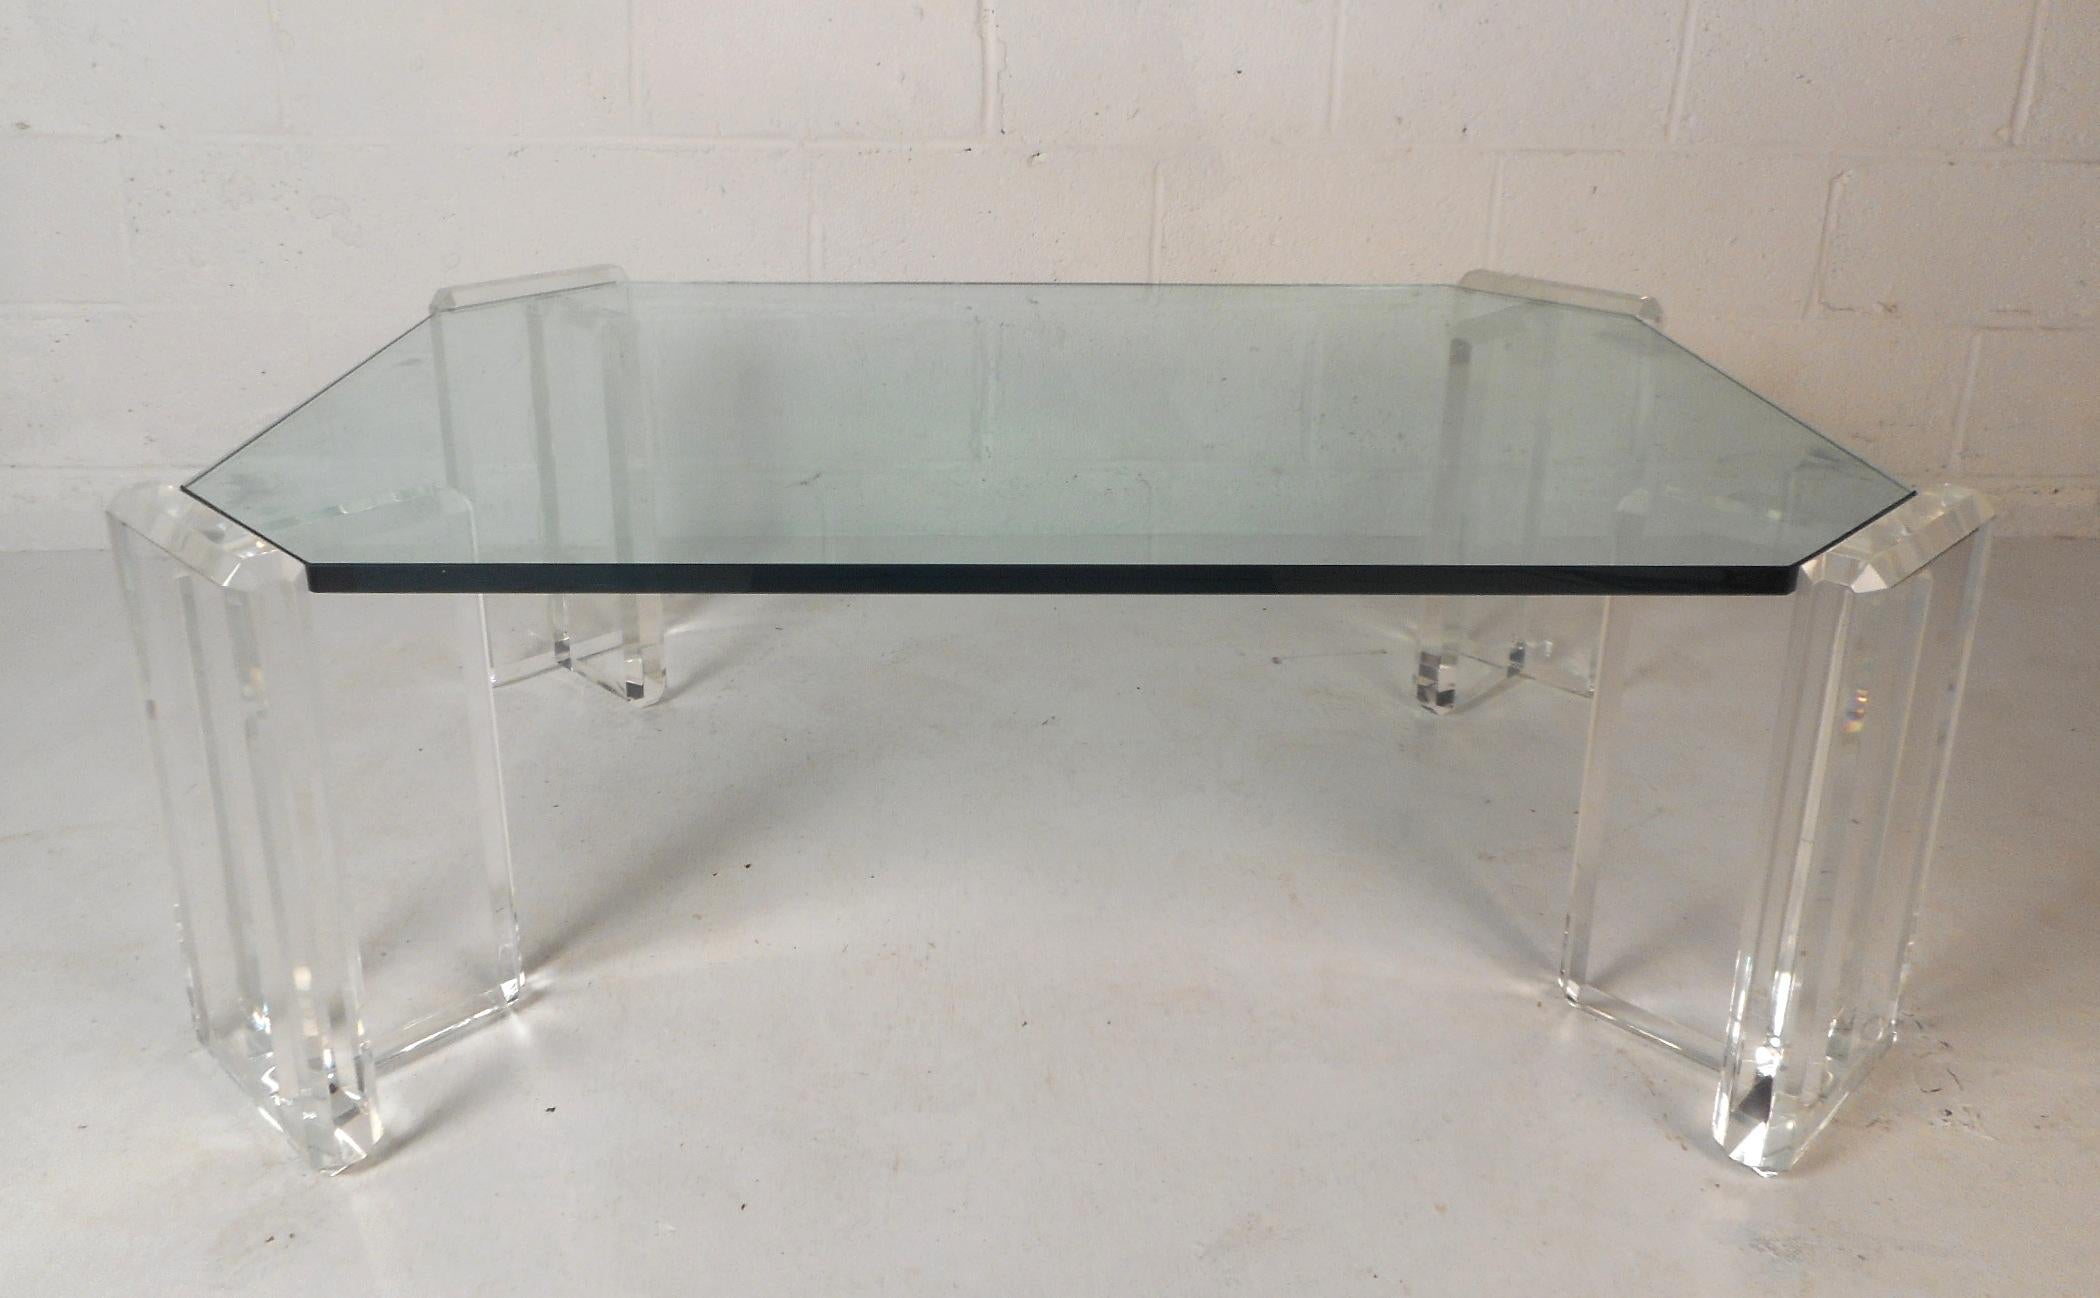 This gorgeous vintage modern coffee table features four individual Lucite bases holding up an extremely thick glass top with bevelled edges. The thick Lucite legs with smooth edges compliment the large glass top making this table an impressive